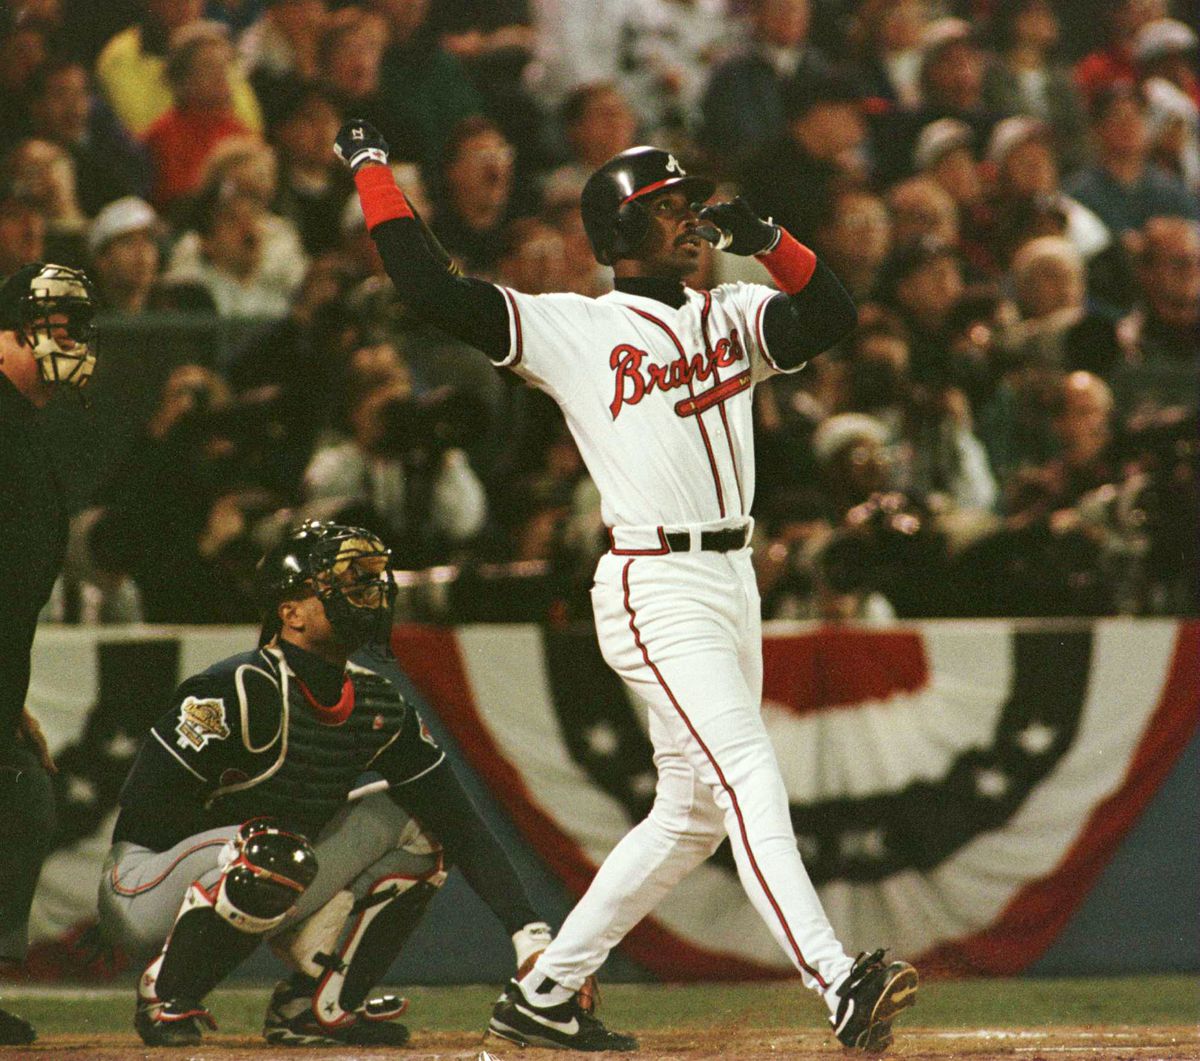 McGriff in a Braves uni